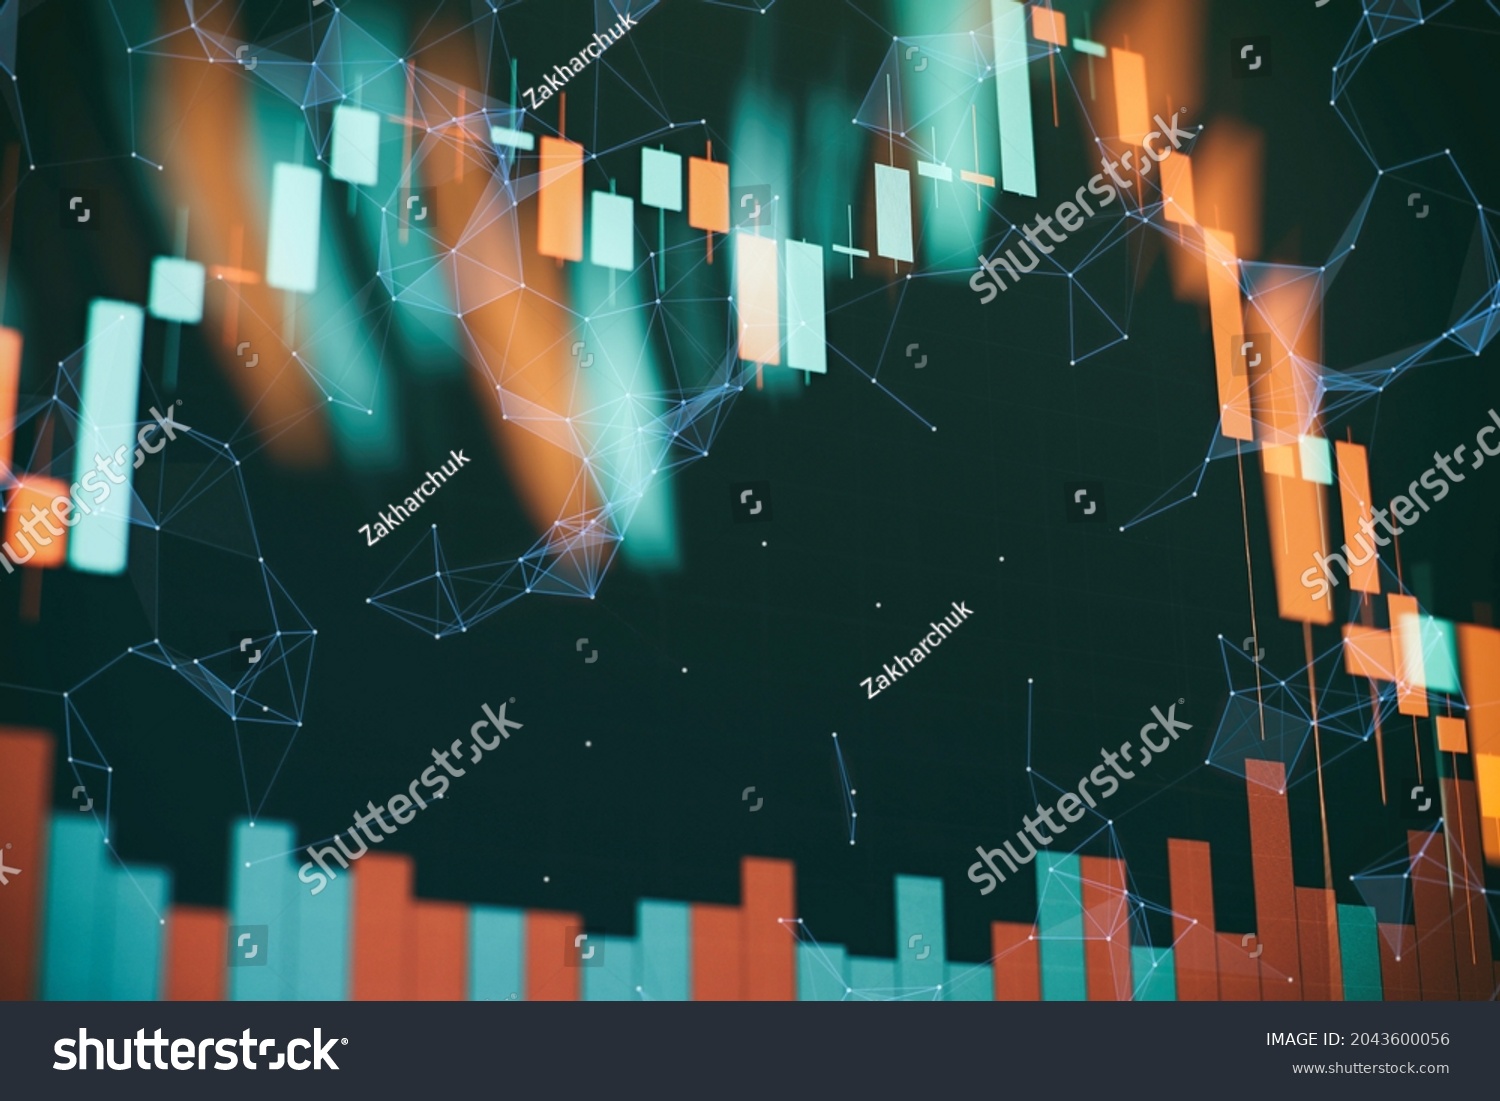 indicators including volume analysis for professional technical analysis on the monitor of a computer. Fundamental and technical analysis concept. #2043600056